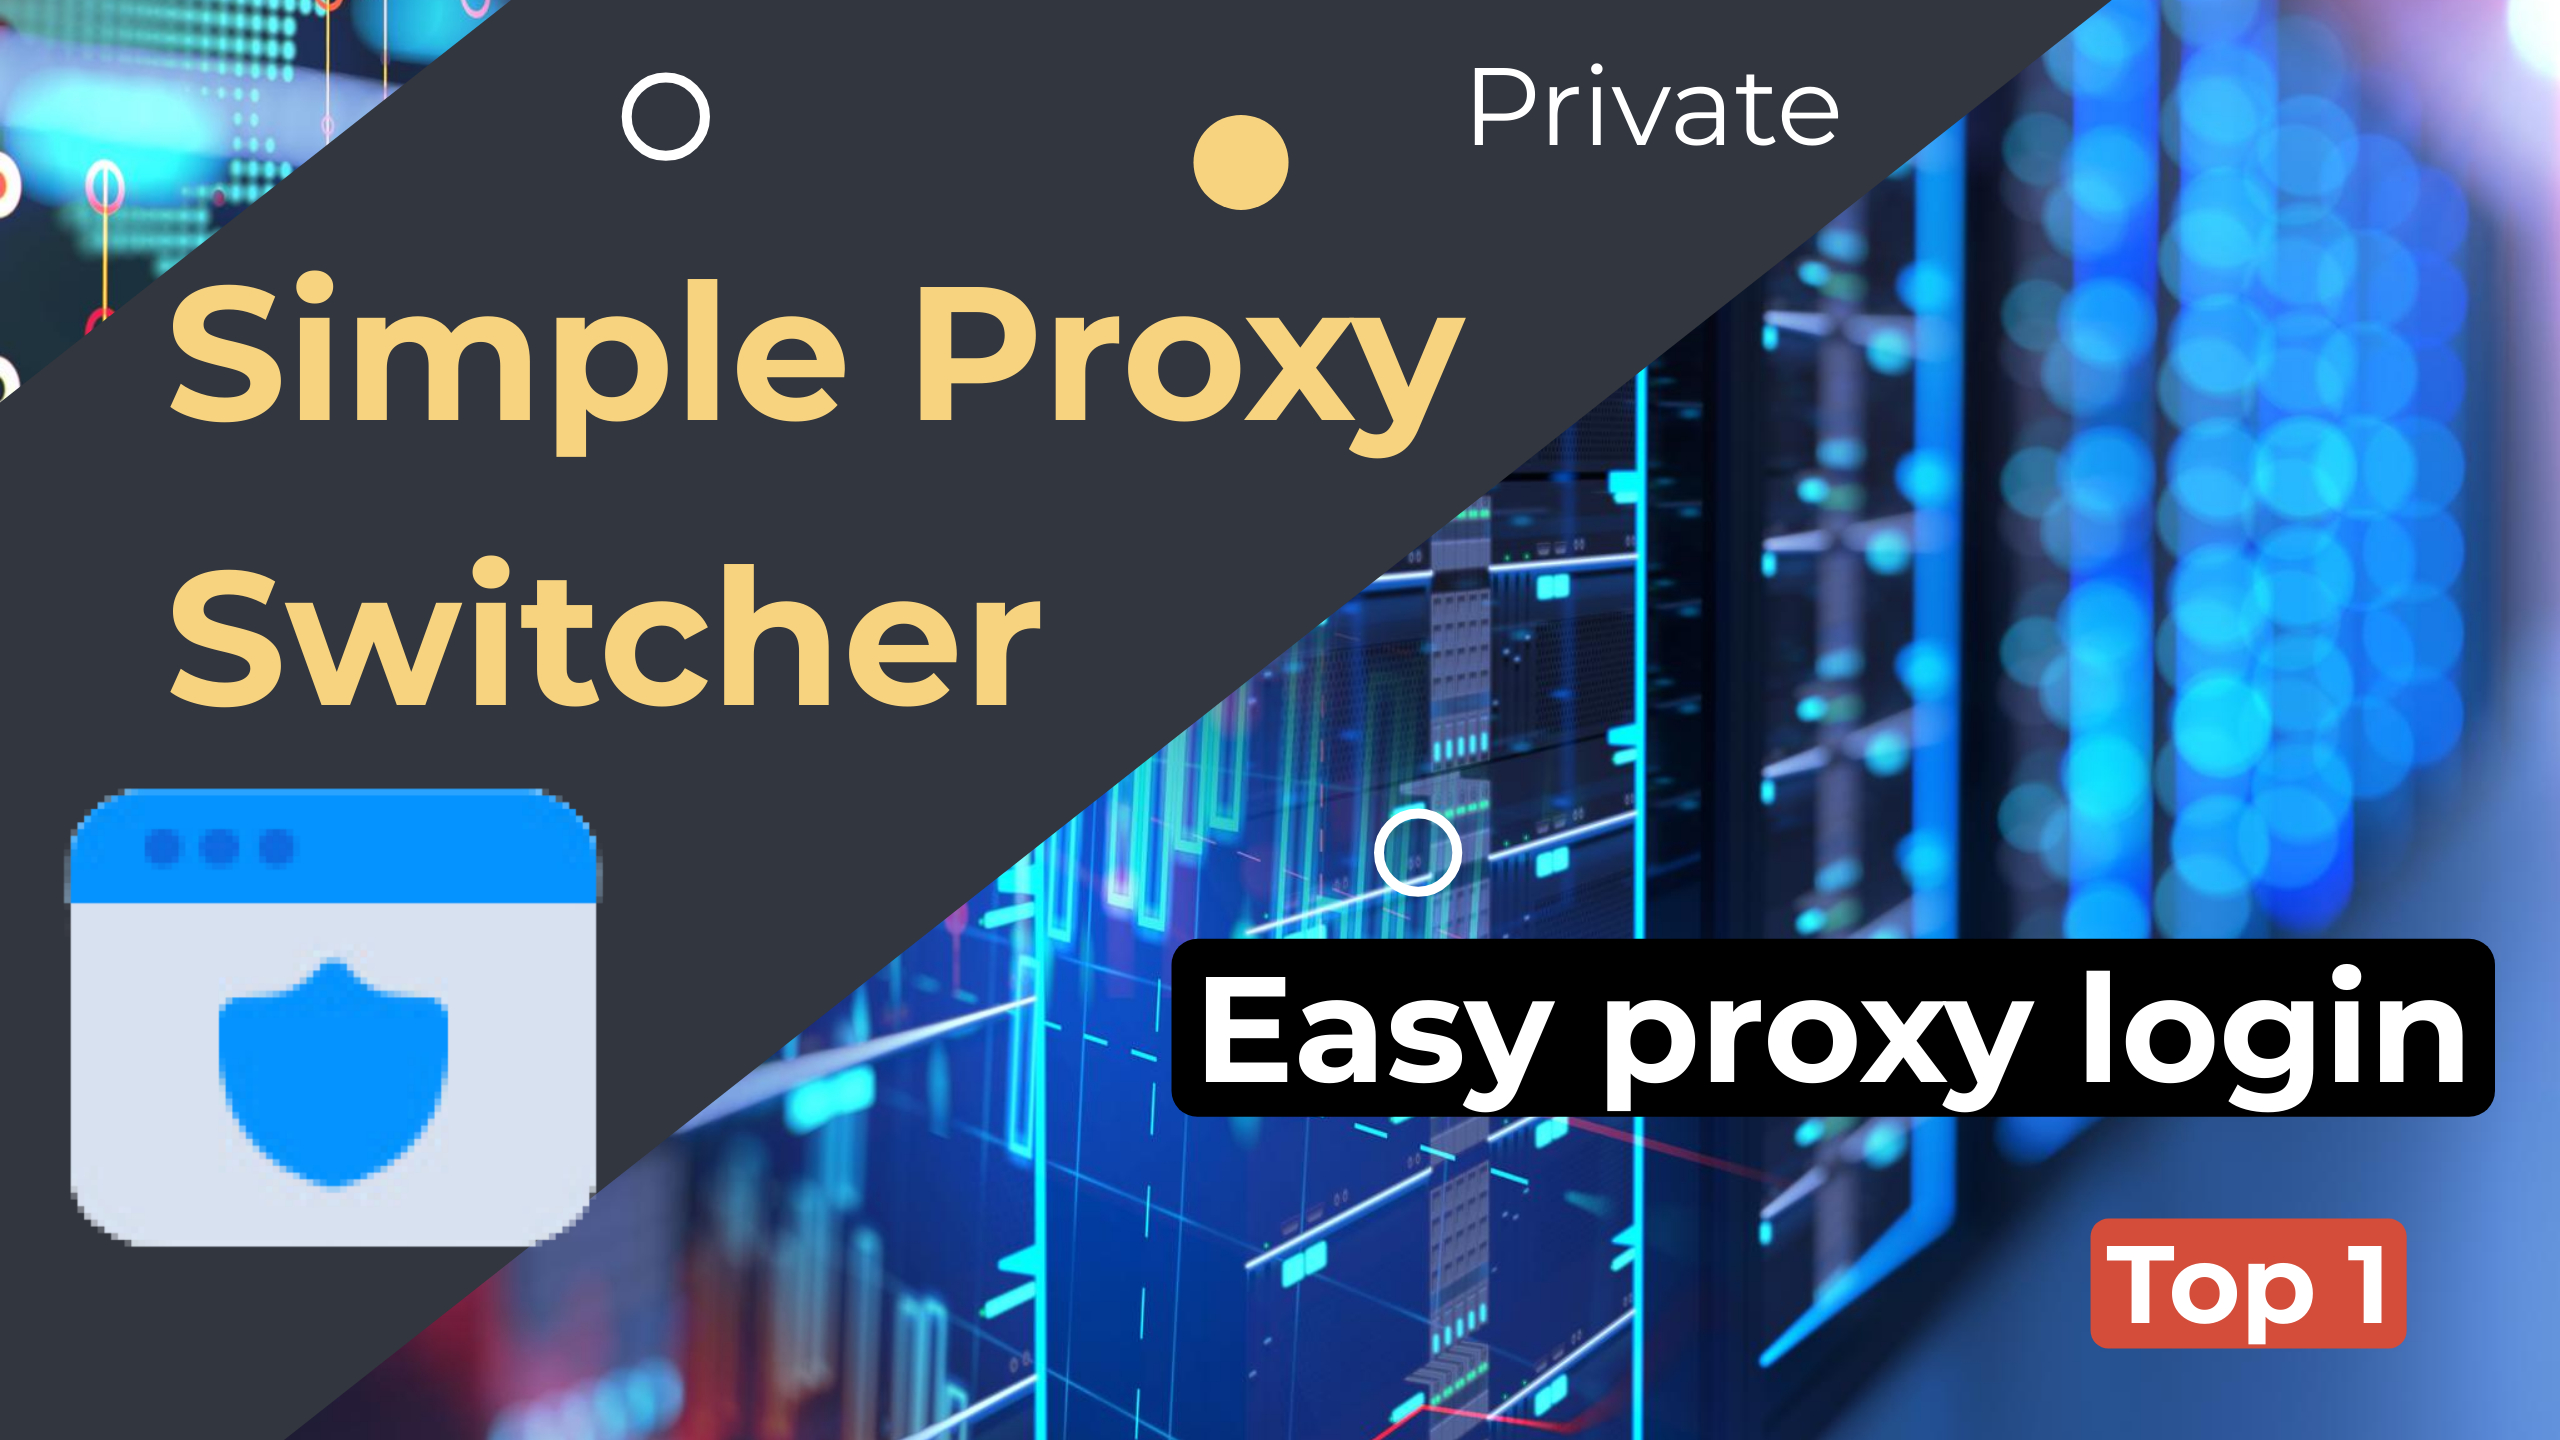 Stay Anonymous and Secure Online with Simple Proxy Switcher